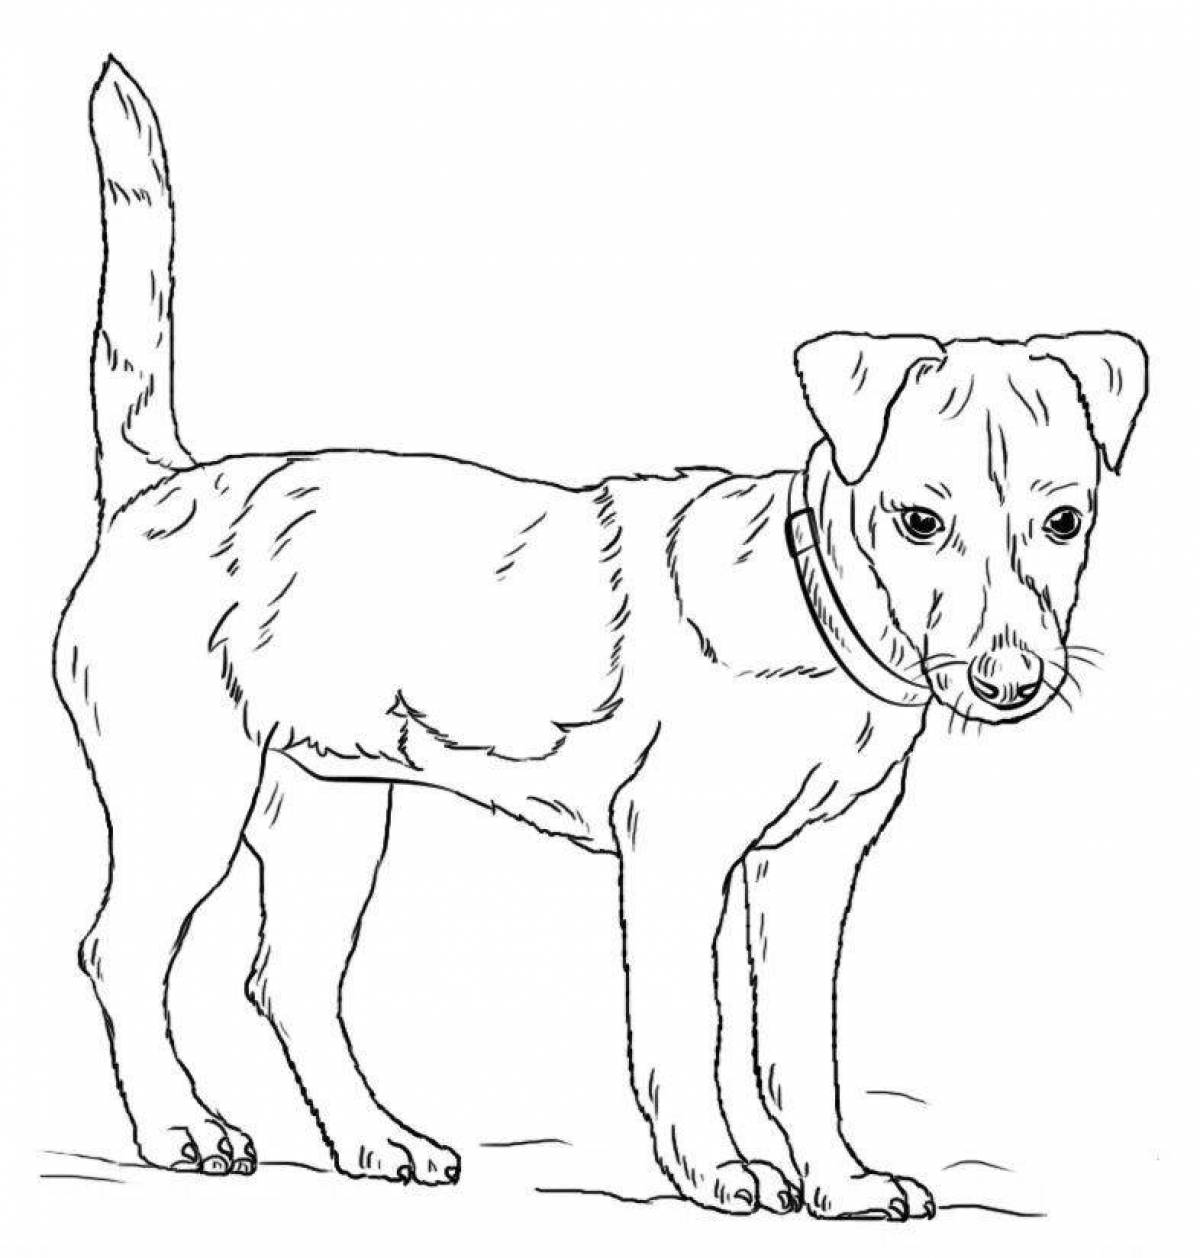 Charming jack russell terrier coloring book